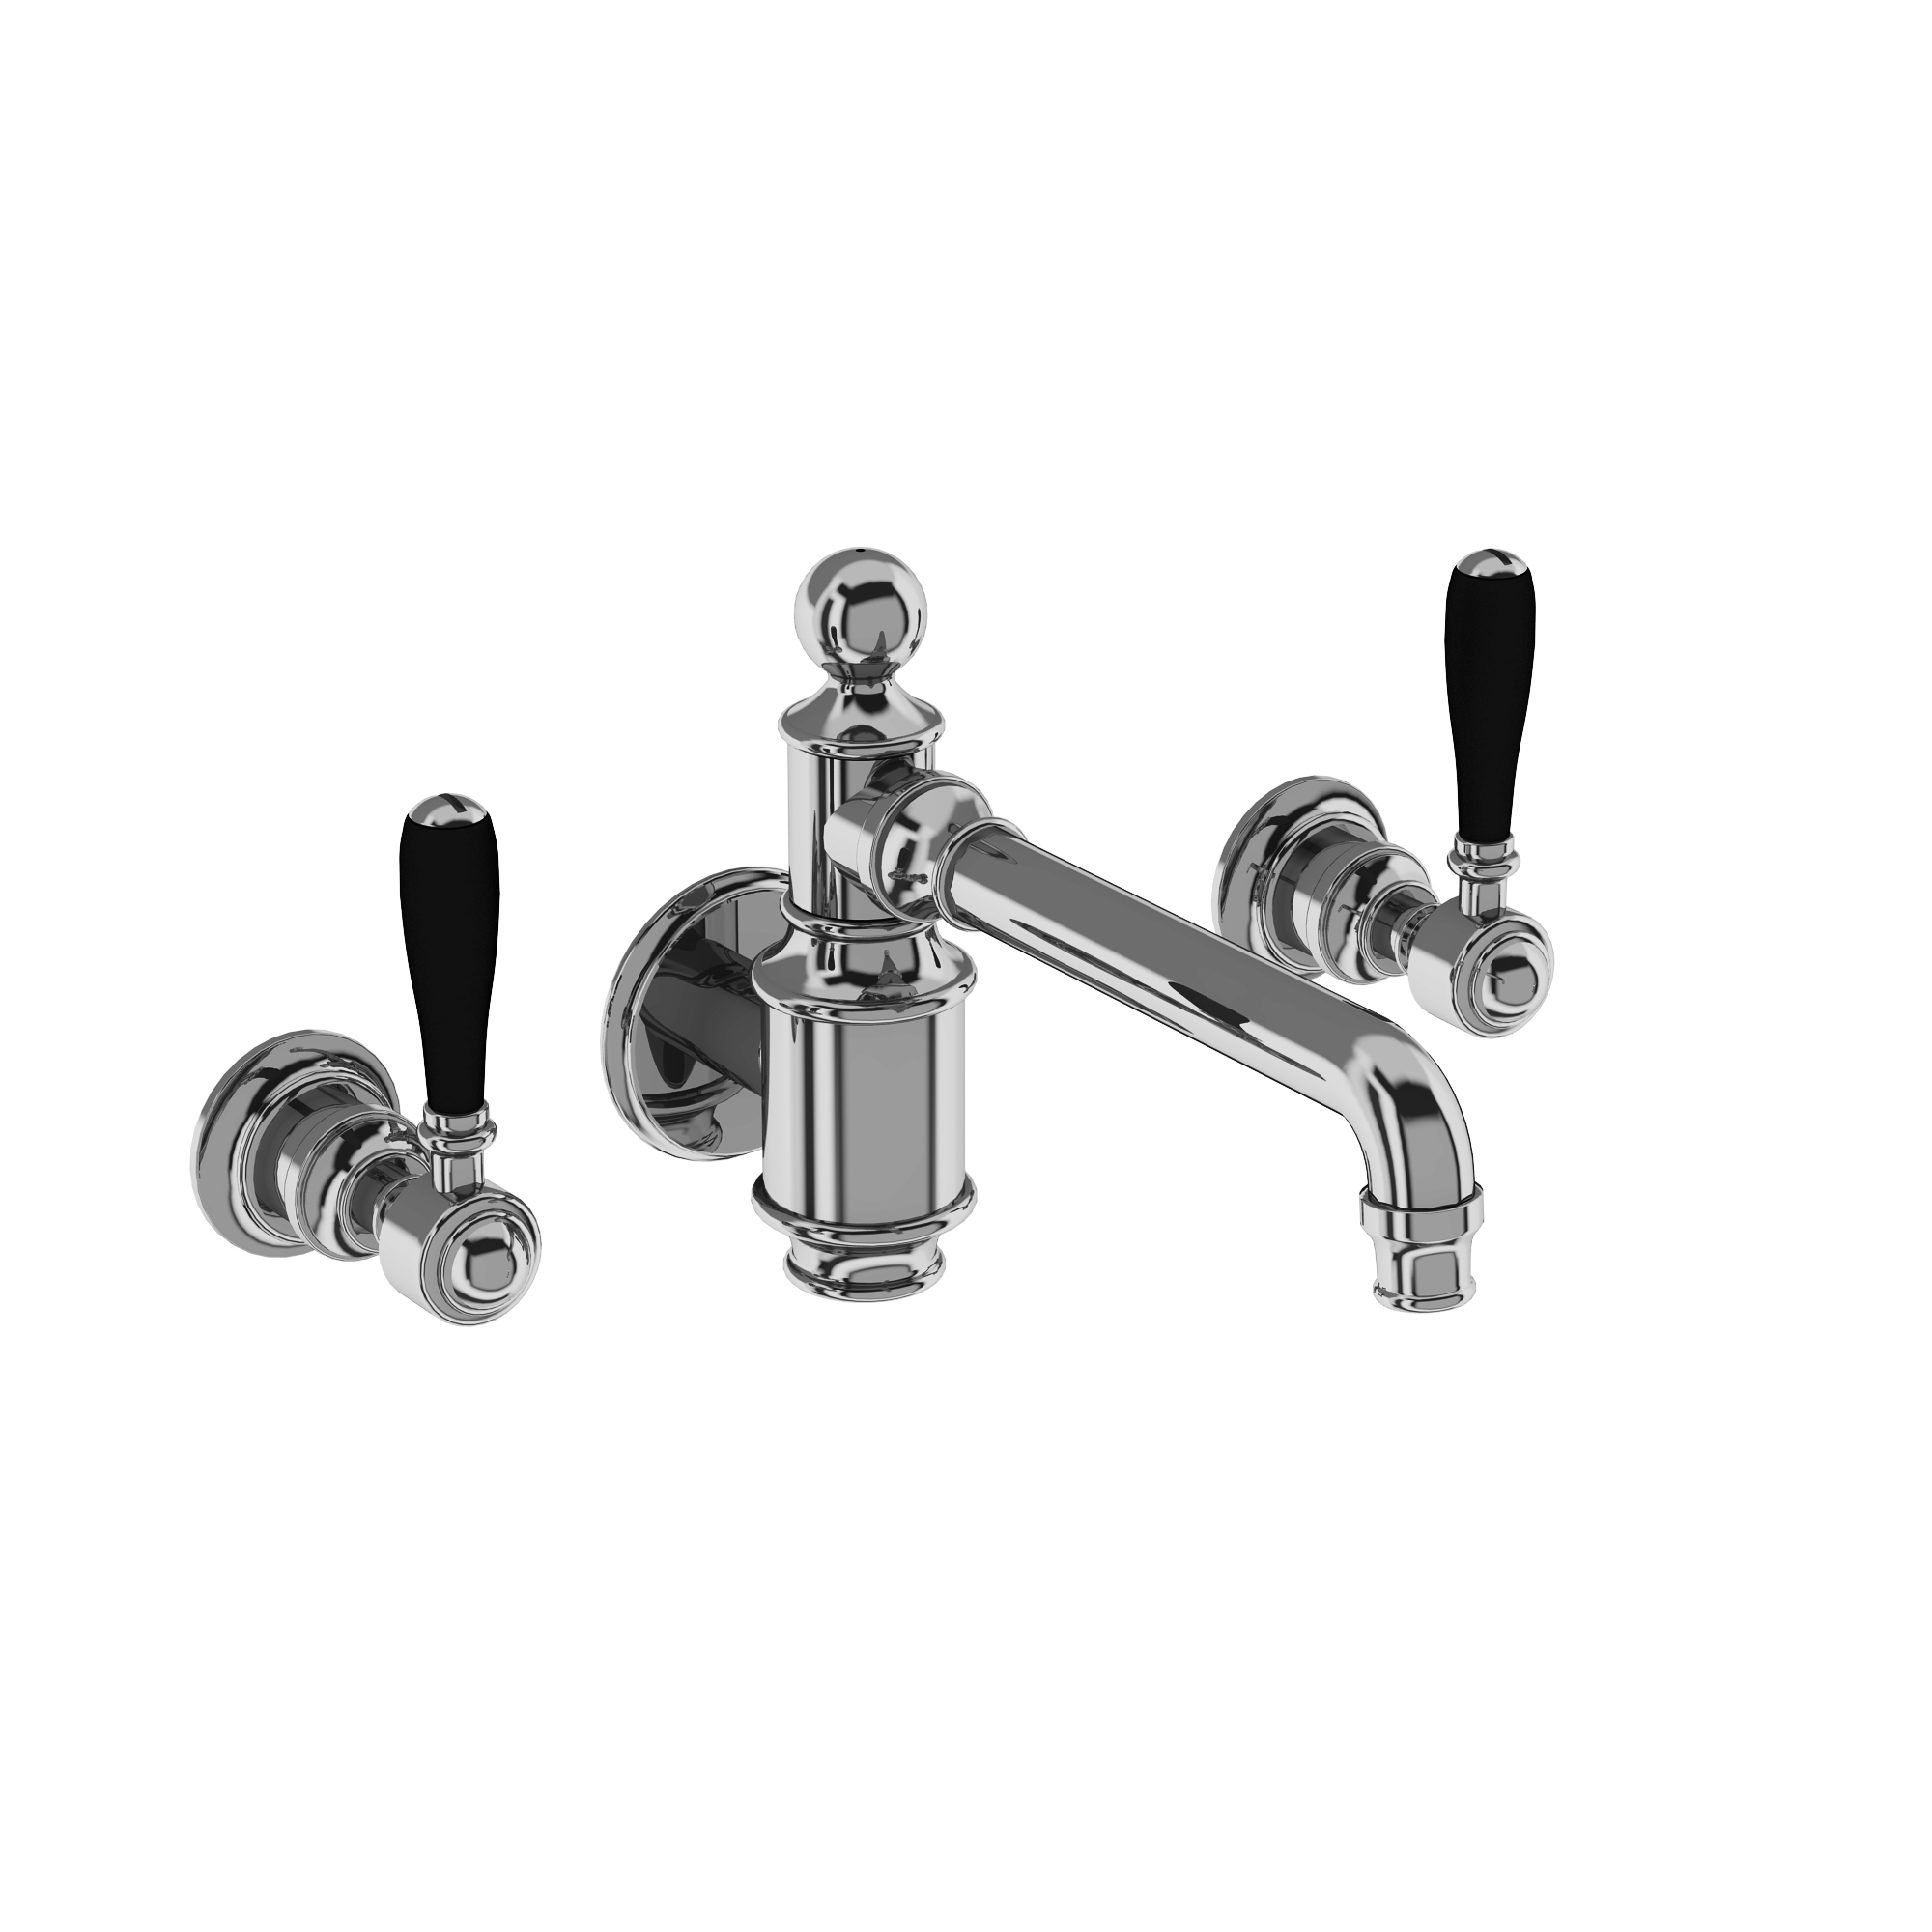 Arcade Three hole basin mixer wall-mounted without pop up waste - chrome - with black lever